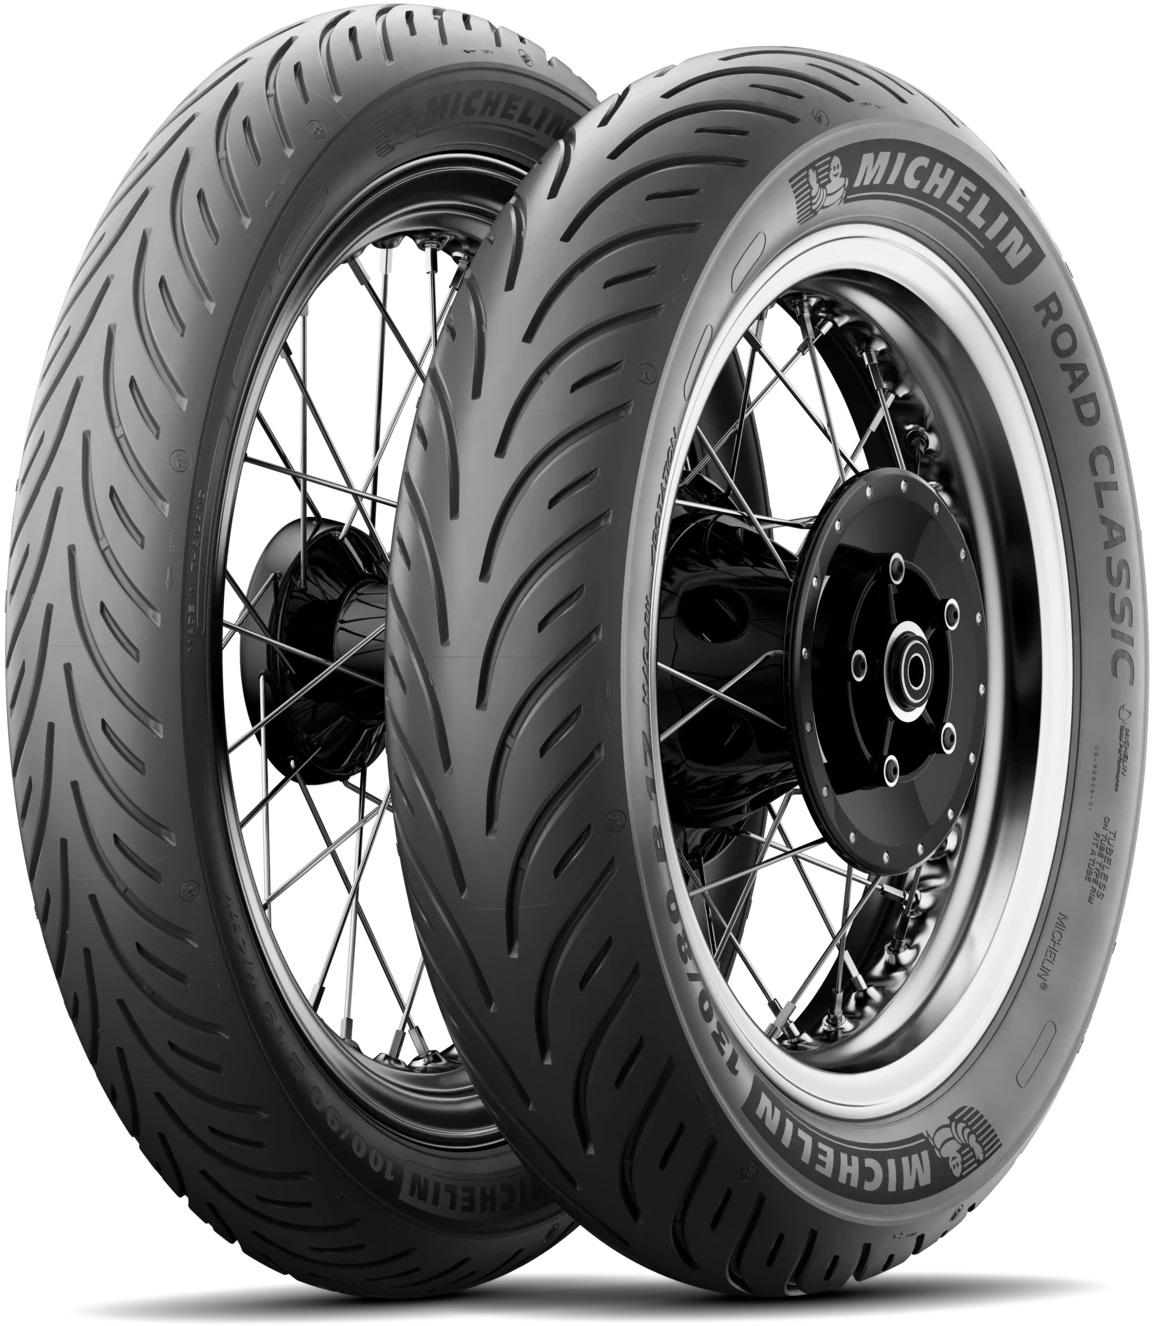 Michelin Road Classic Tyres